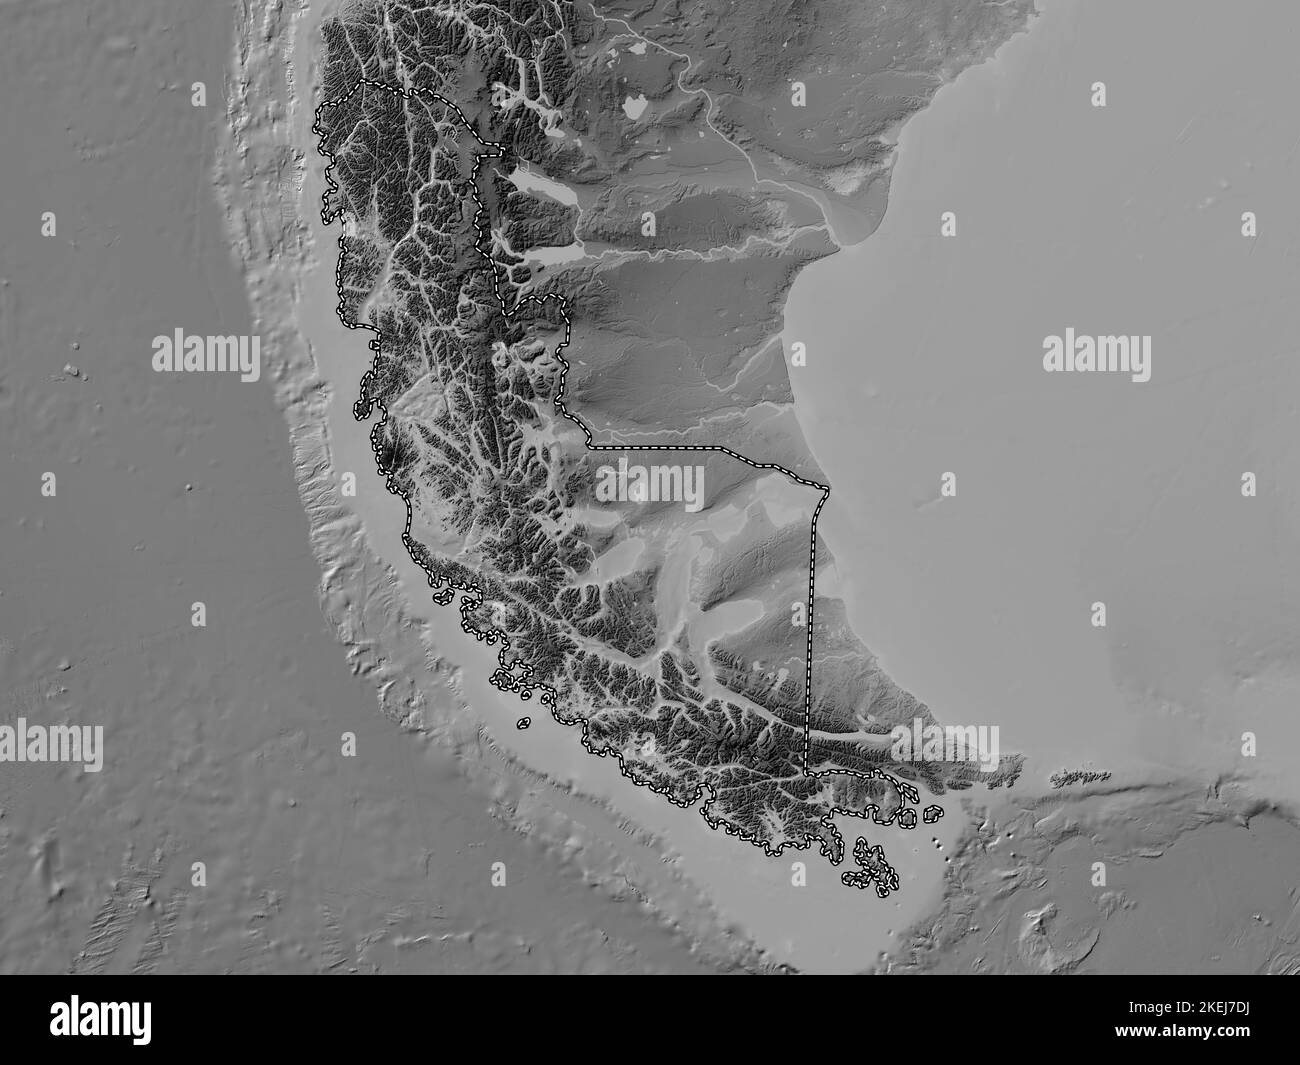 Magallanes y Antartica Chilena, region of Chile. Grayscale elevation map with lakes and rivers Stock Photo